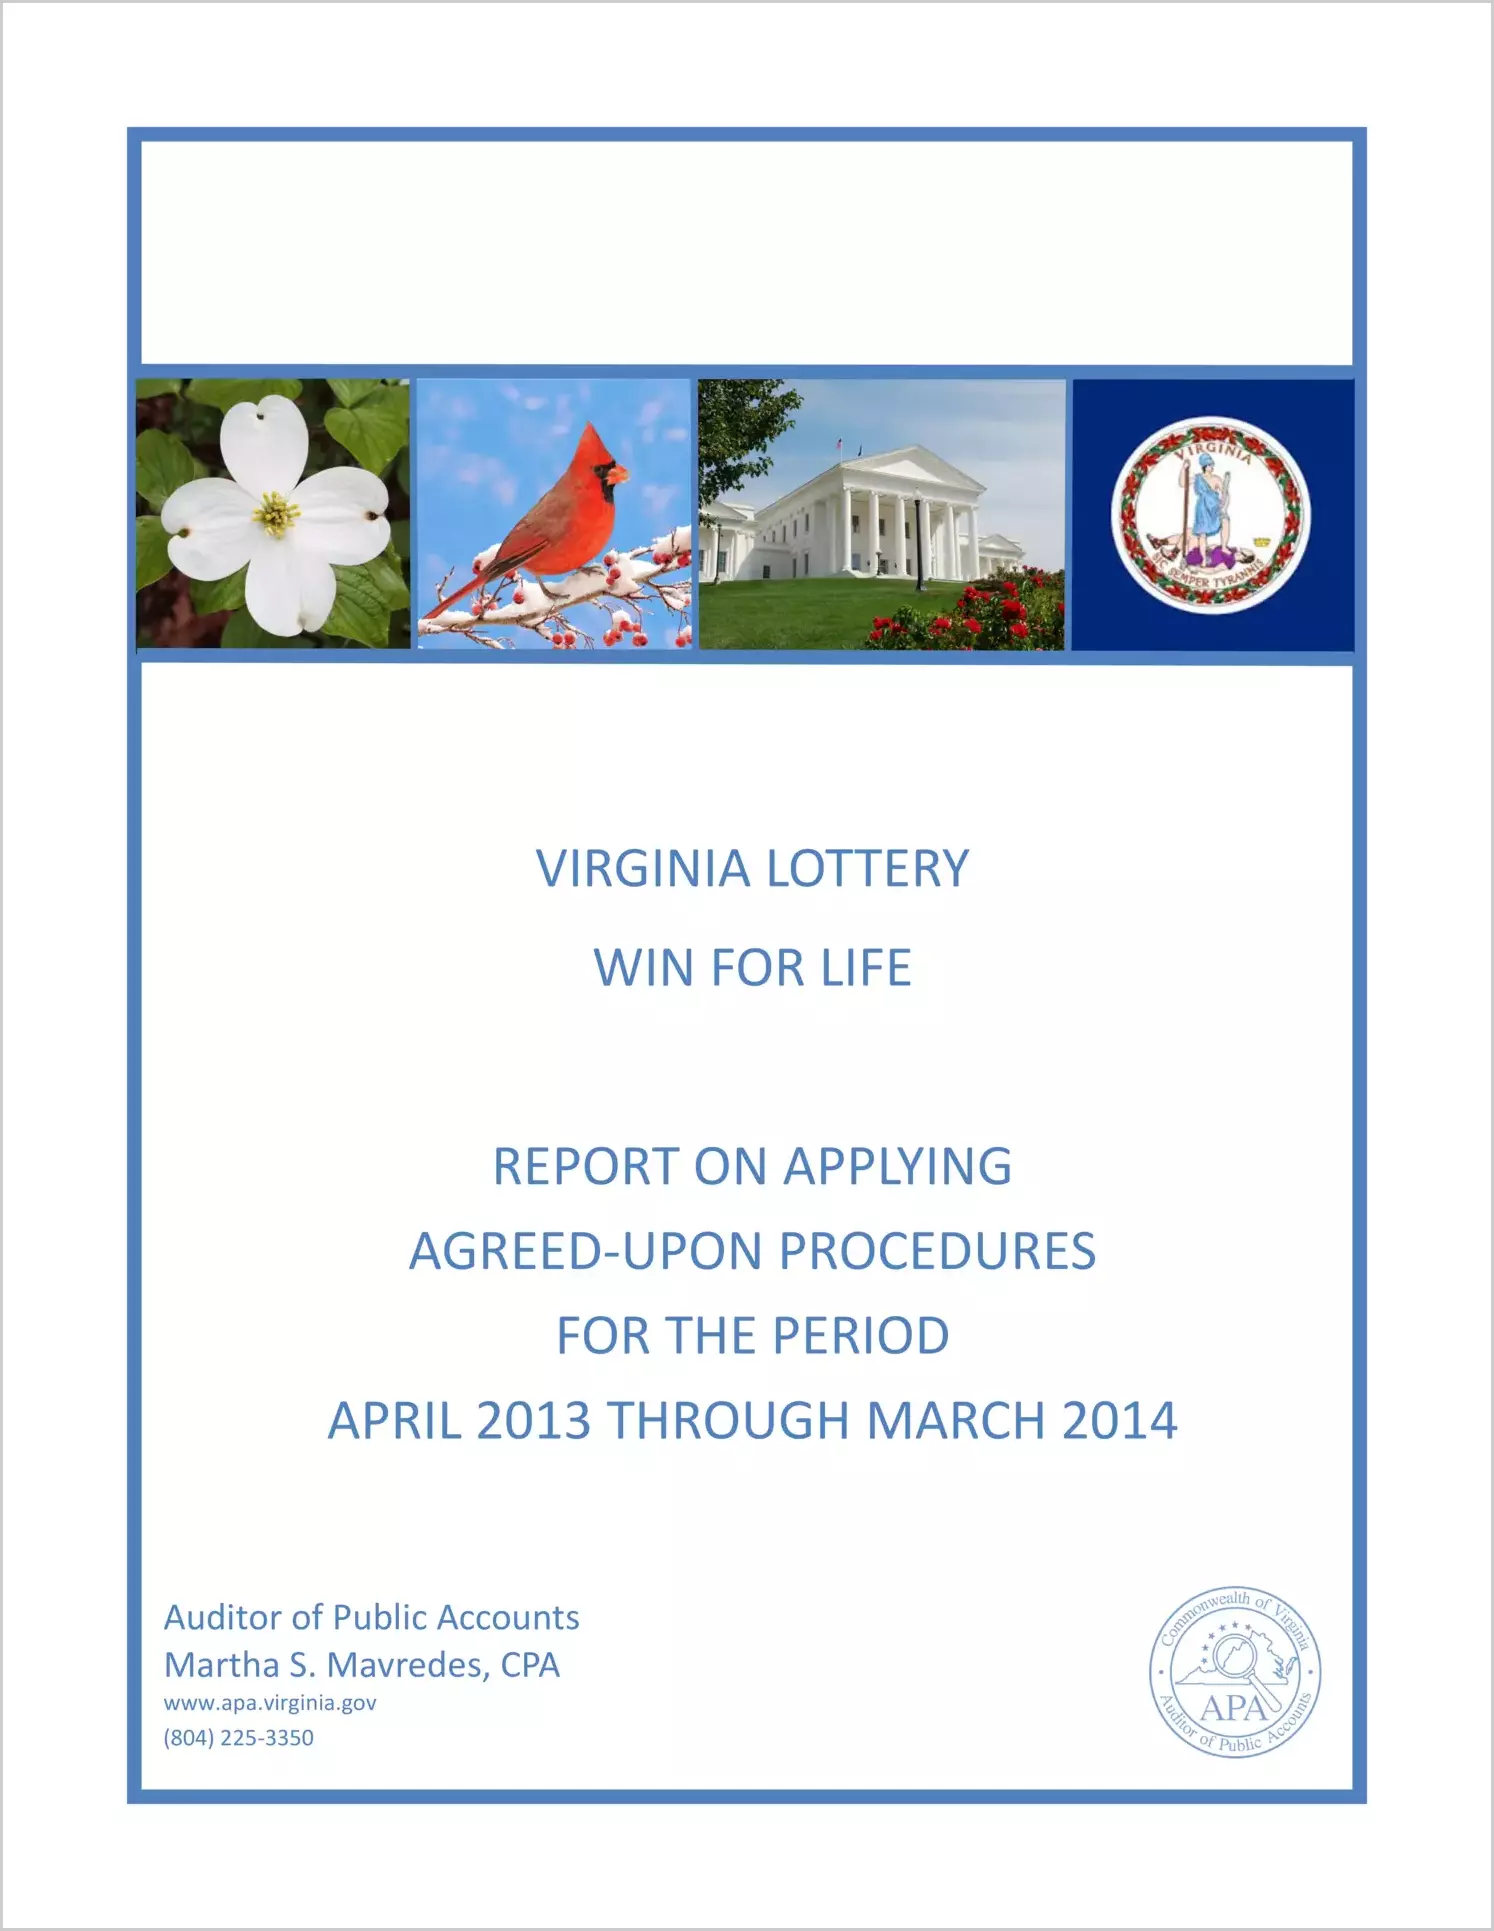 VA Lottery Win for Life report on Applying Agreed-Upon Procedures for the period April, 2013 through March, 2014